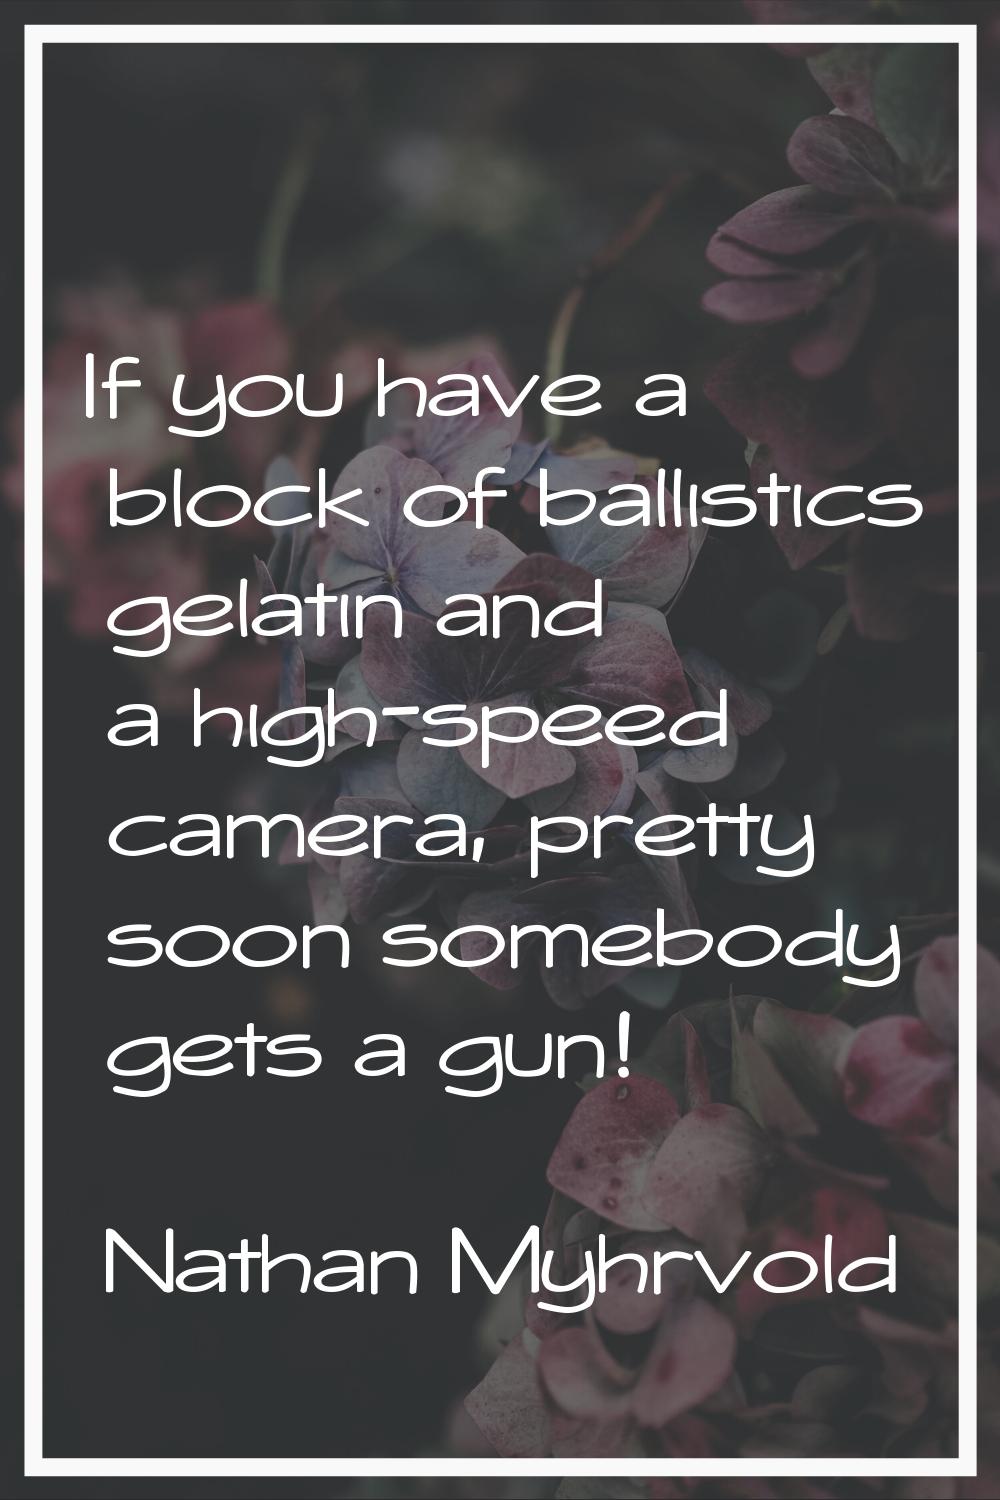 If you have a block of ballistics gelatin and a high-speed camera, pretty soon somebody gets a gun!